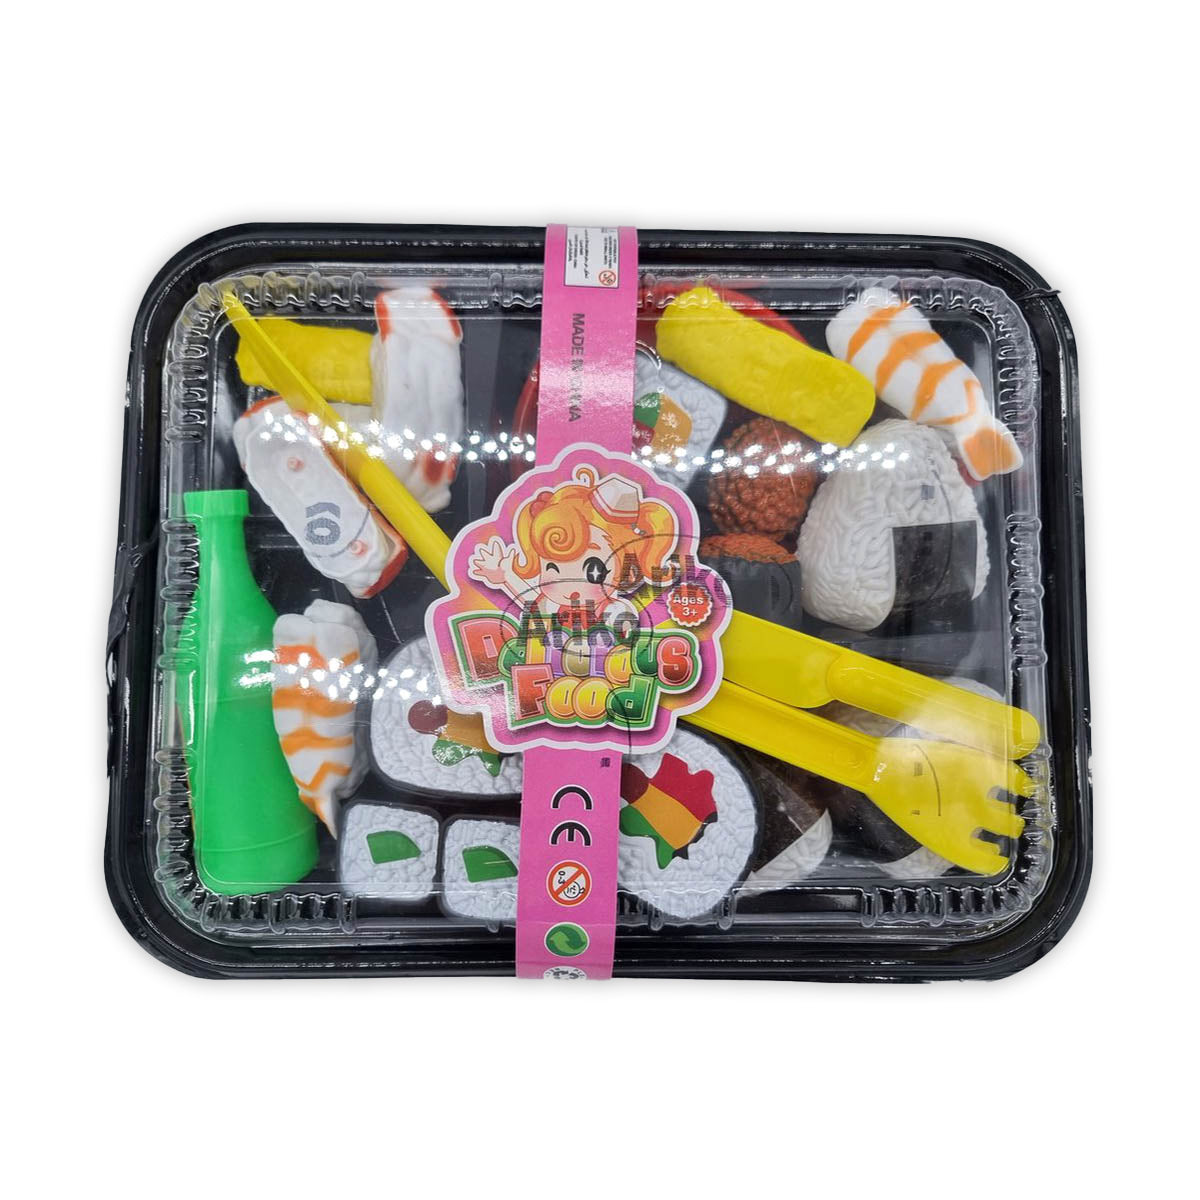 <tc>Ariko</tc> toy sushi set - with cutlery, tray and soy container